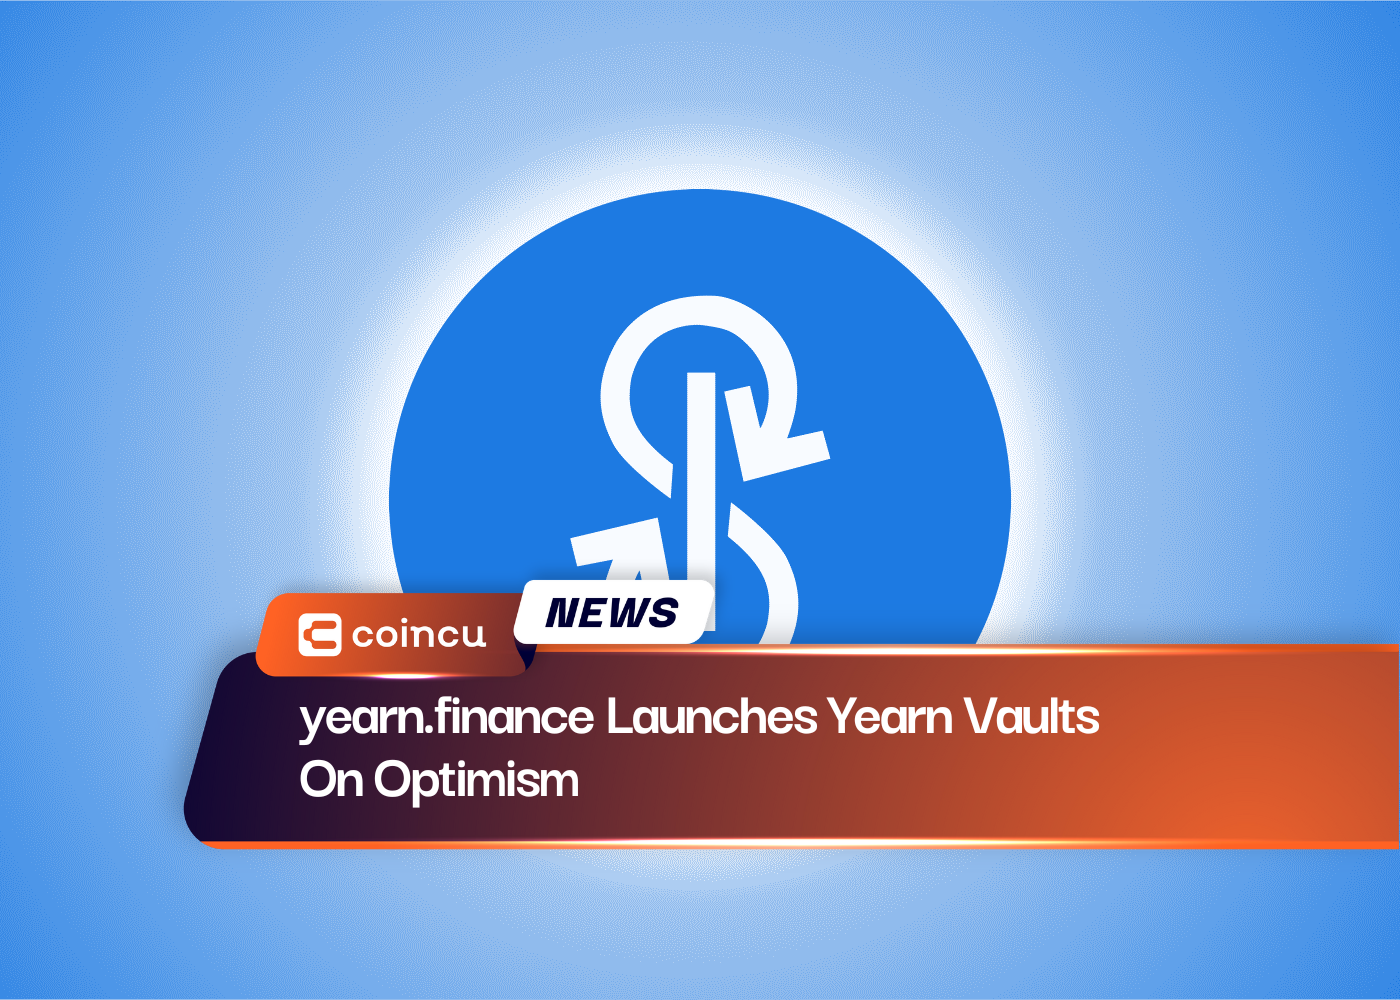 yearn.finance Launches Yearn Vaults On Optimism